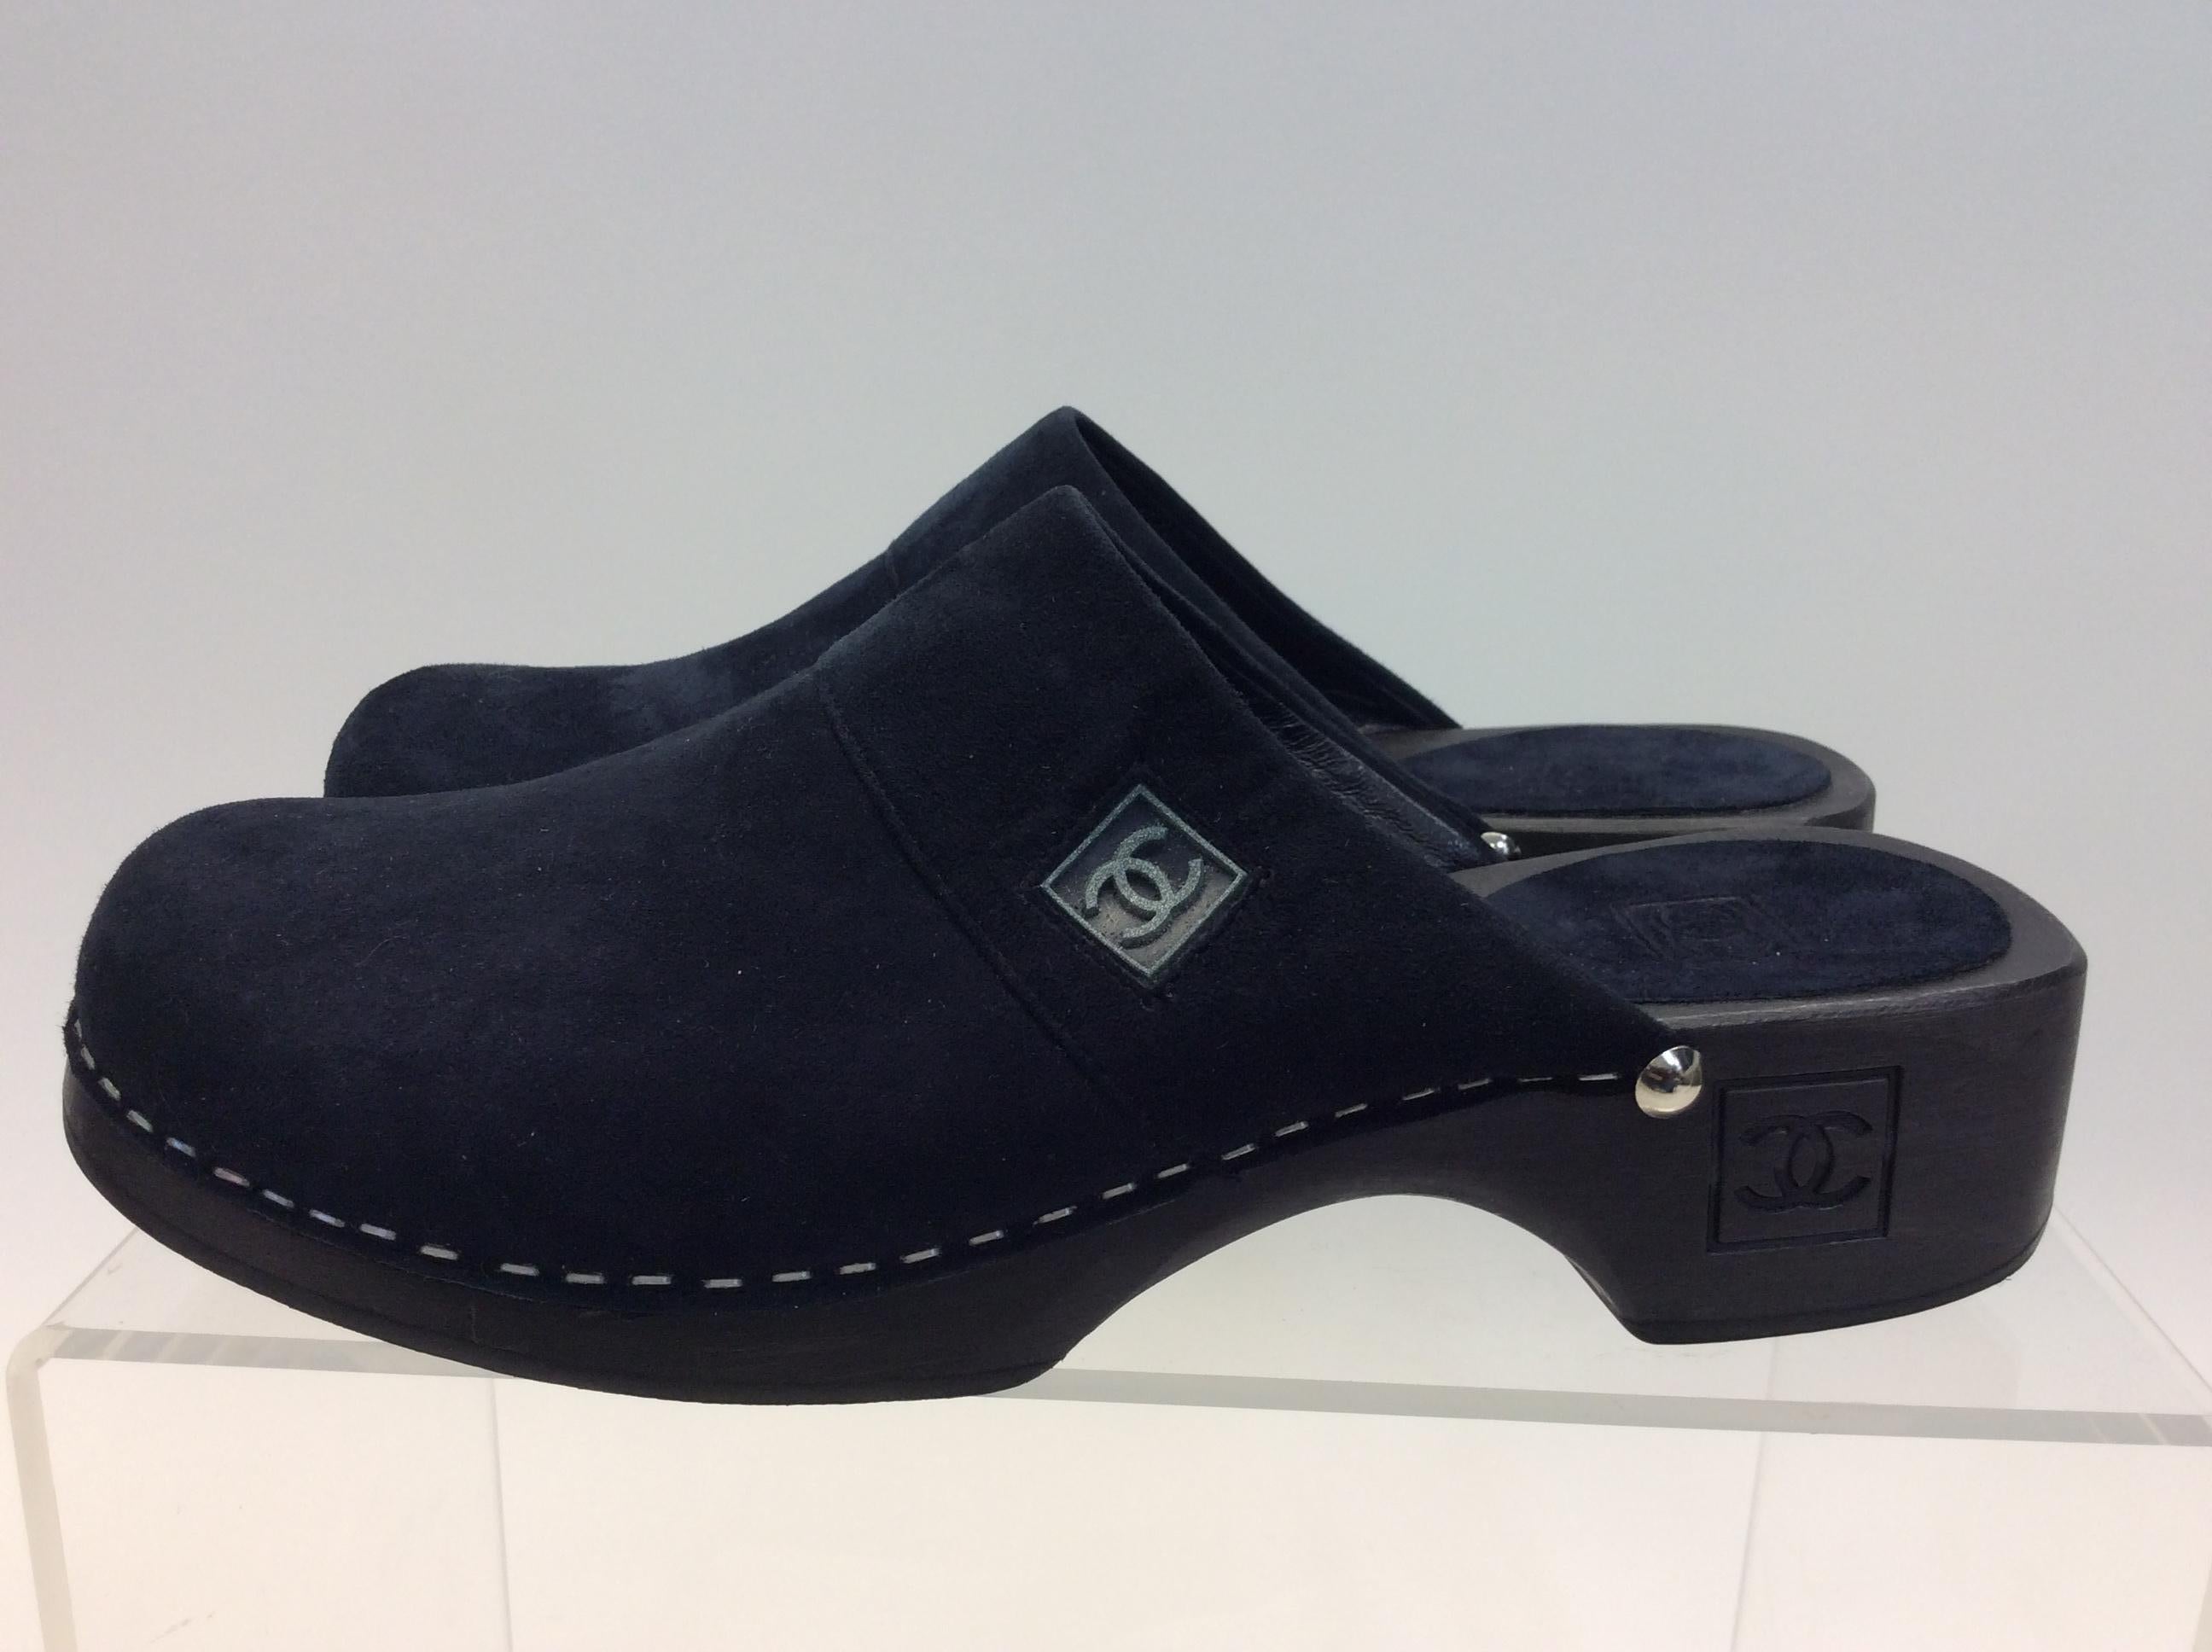 Chanel Navy Blue Suede Clogs
$178
Suede
Size 36
1.25